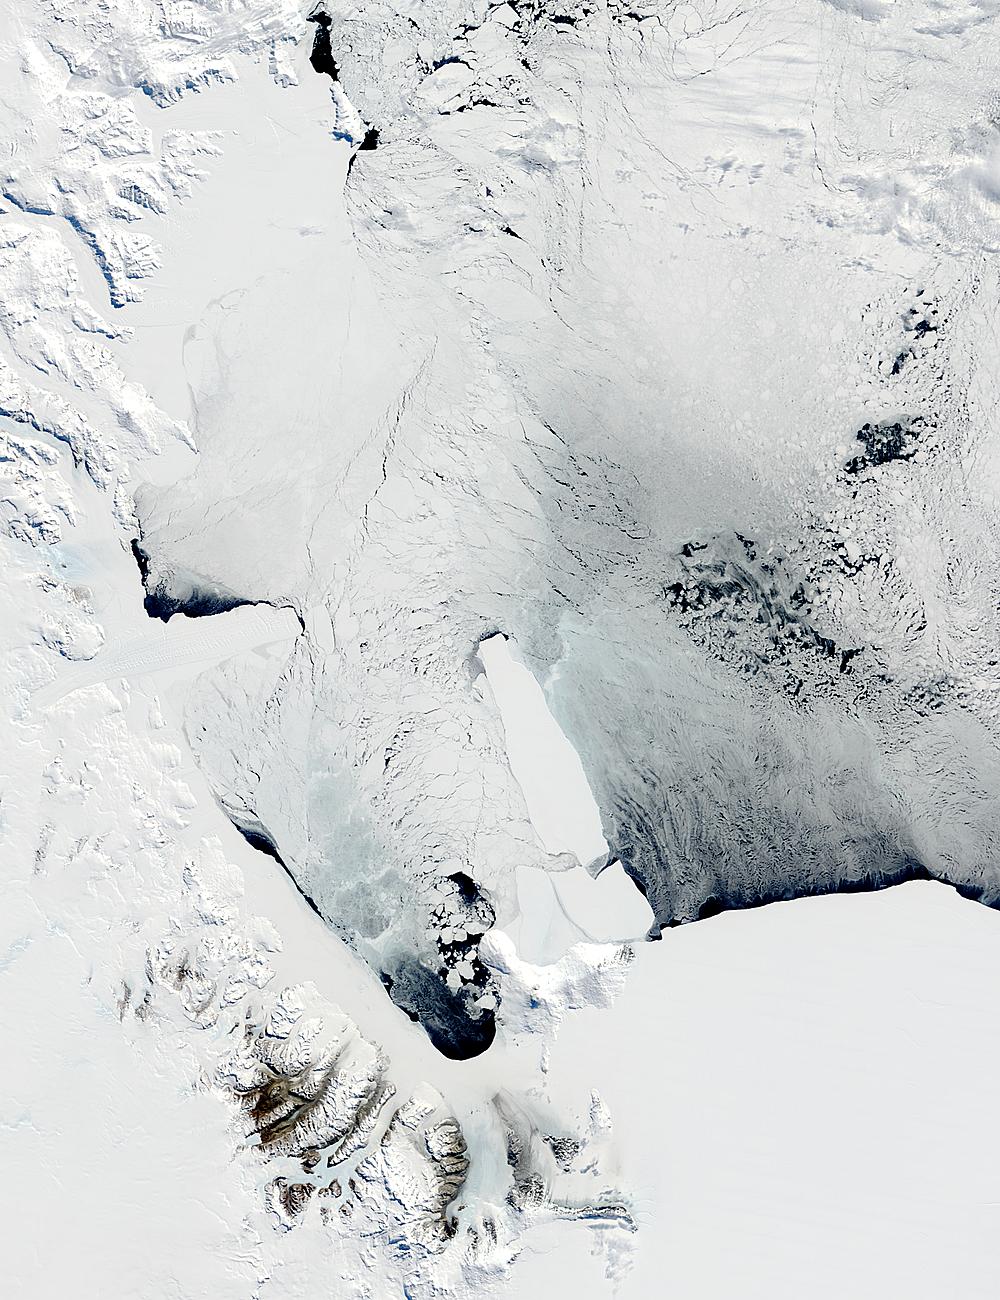 B-15A, B-15J, and C-16 icebergs in the Ross Sea, Antarctica - related image preview